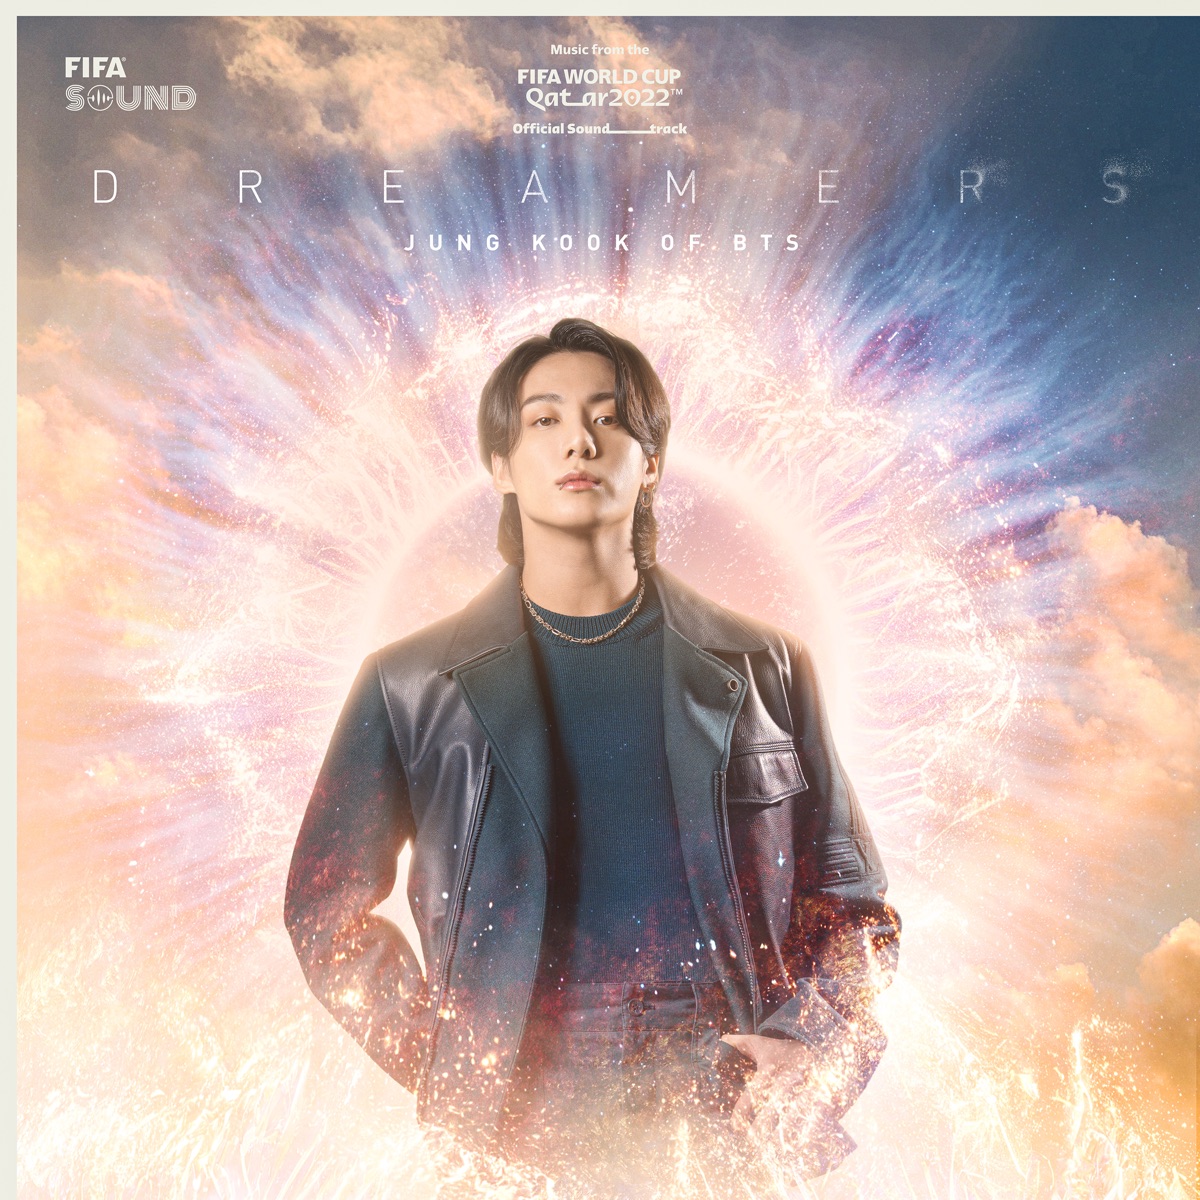 Cover art for『Jung Kook (BTS) - Dreamers』from the release『Jung Kook (BTS) - Dreamers [Music from the Fifa World Cup Qatar 2022 Official Soundtrack]